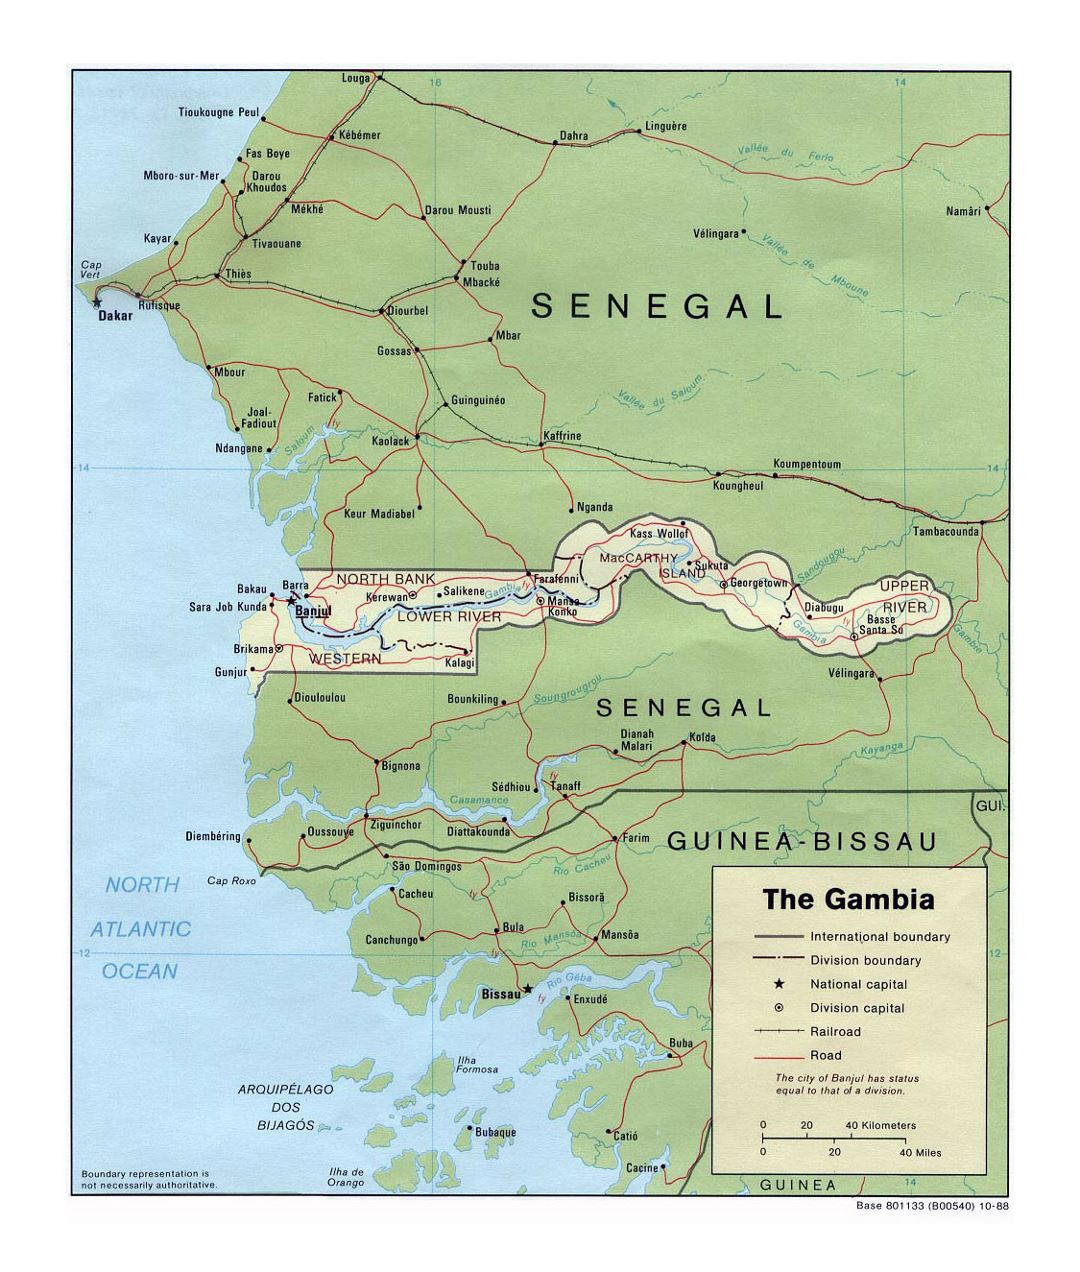 Detailed political and administrative map of Gambia with roads, railroads and major cities - 1988